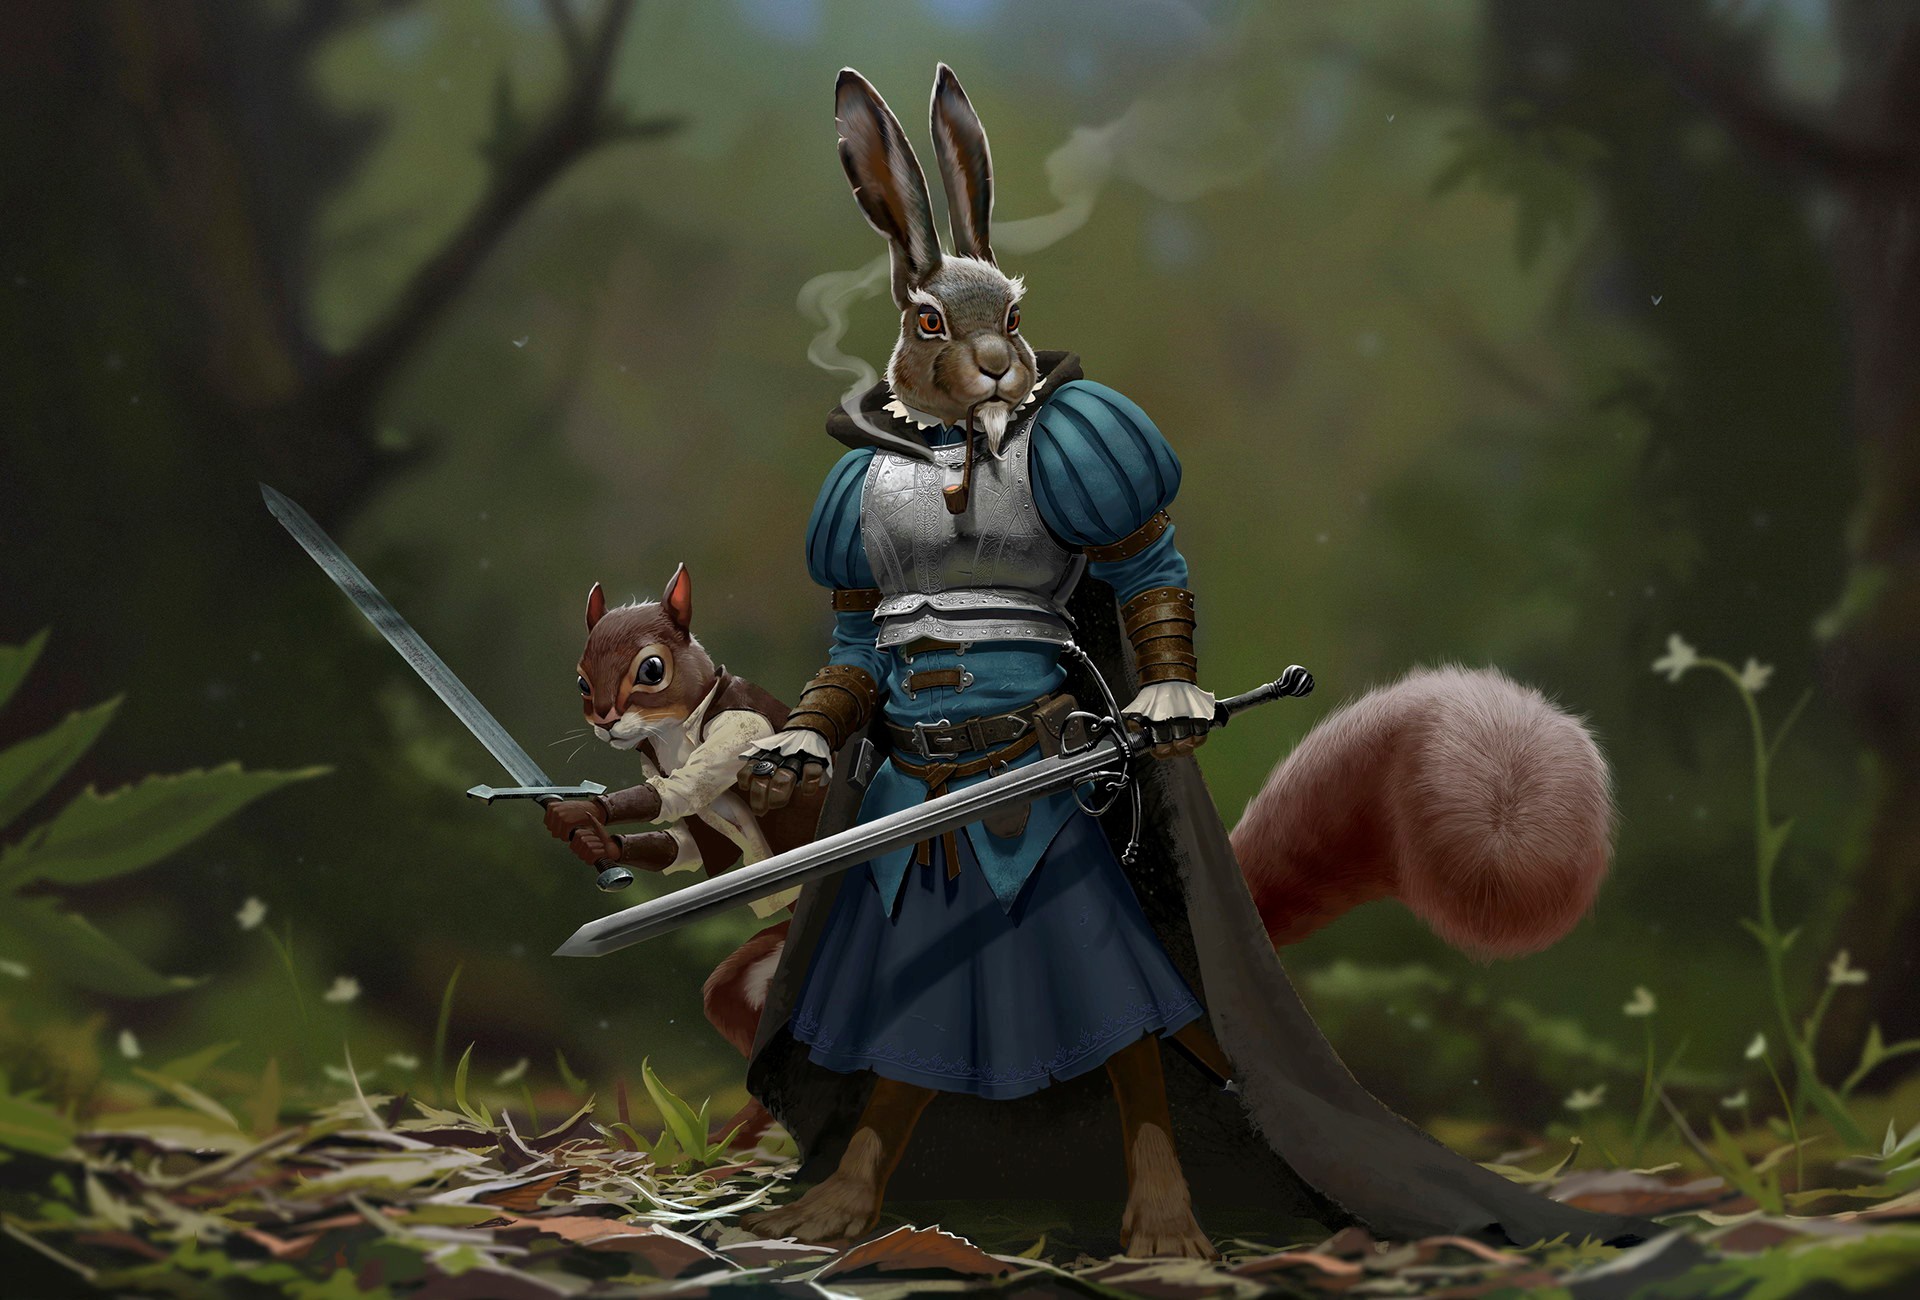 The Old Hare and His Disciple by Johannes Holm